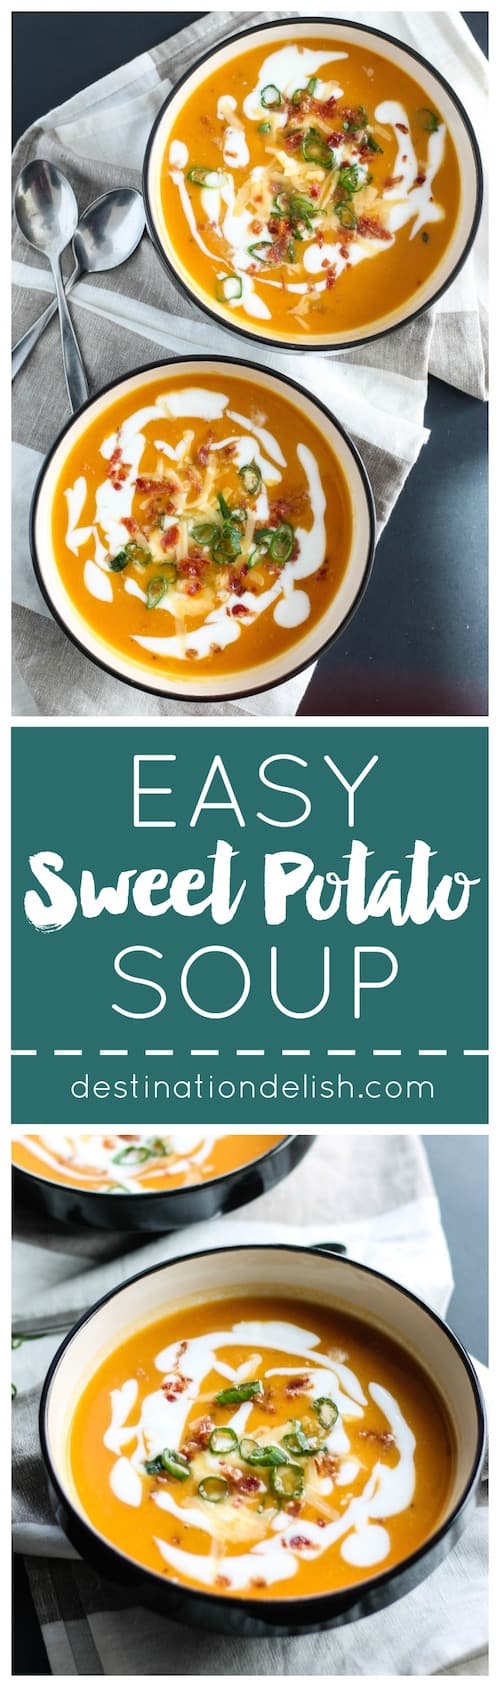 Easy Sweet Potato Soup | Destination Delish – a simple sweet potato soup made with just 5 ingredients. Pile on your favorite toppings!